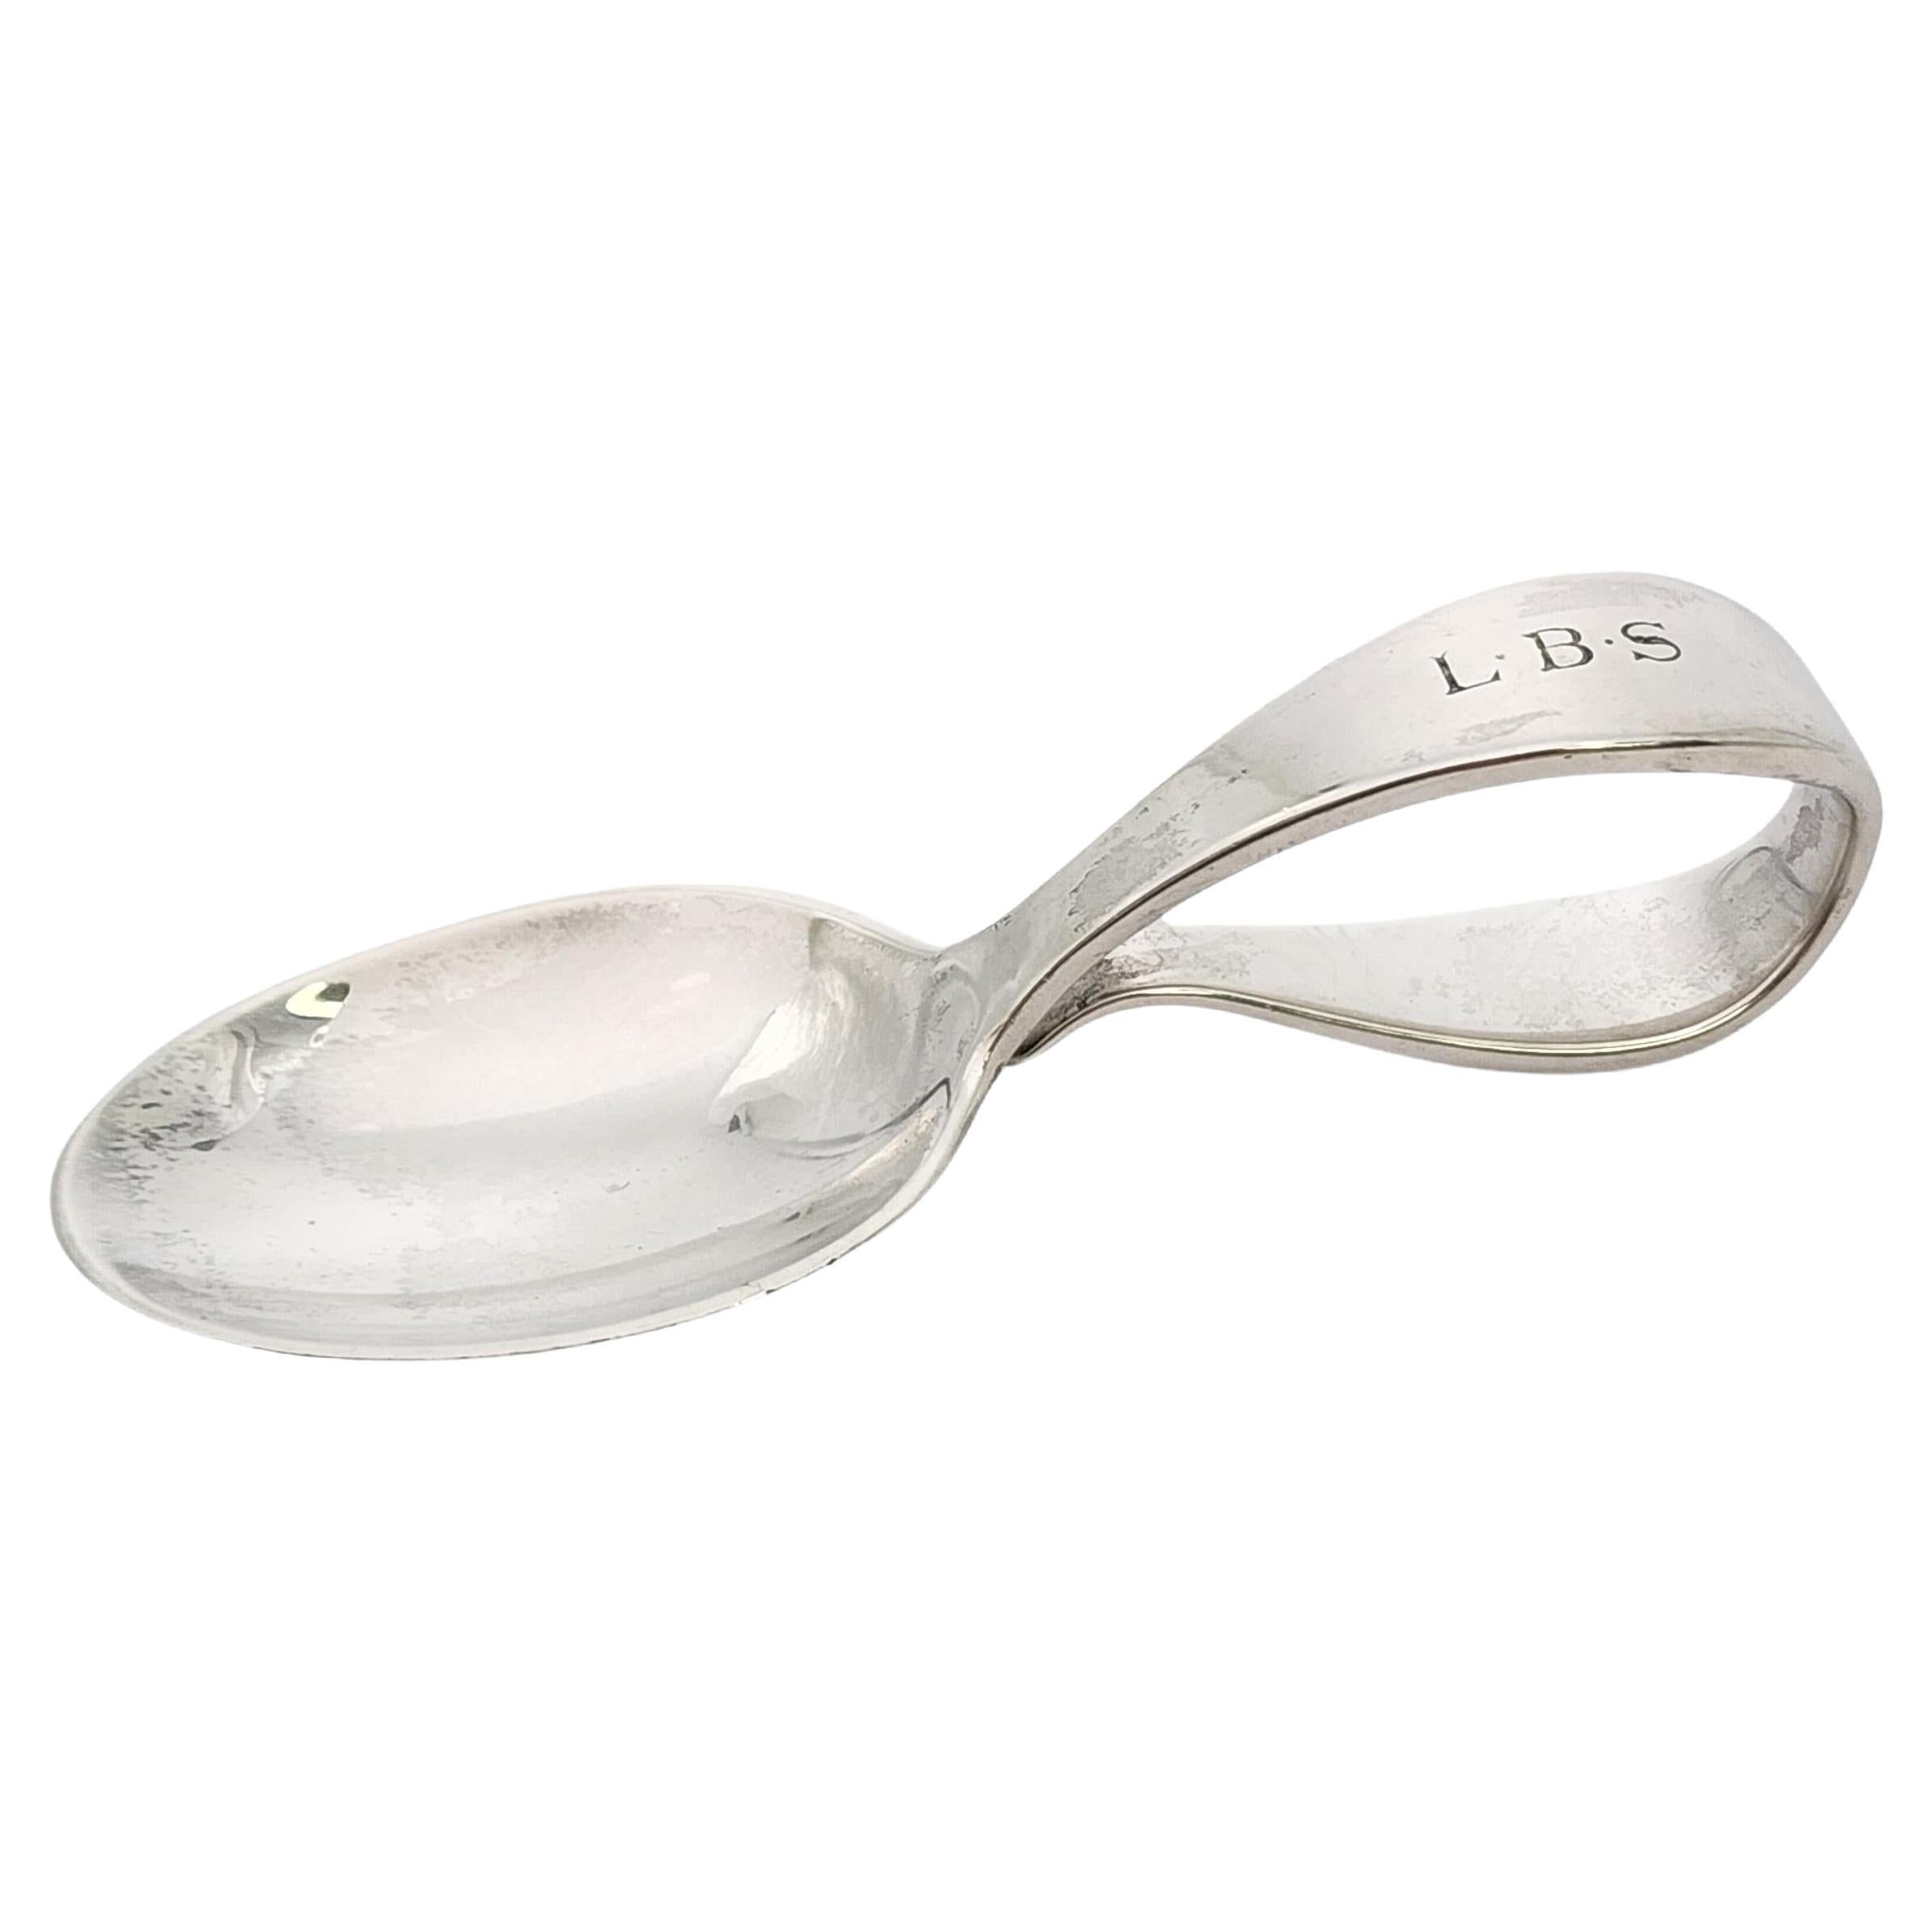 Tiffany & Co Sterling Silver Curved Loop Handle Baby Spoon w/Monogram #17262 For Sale